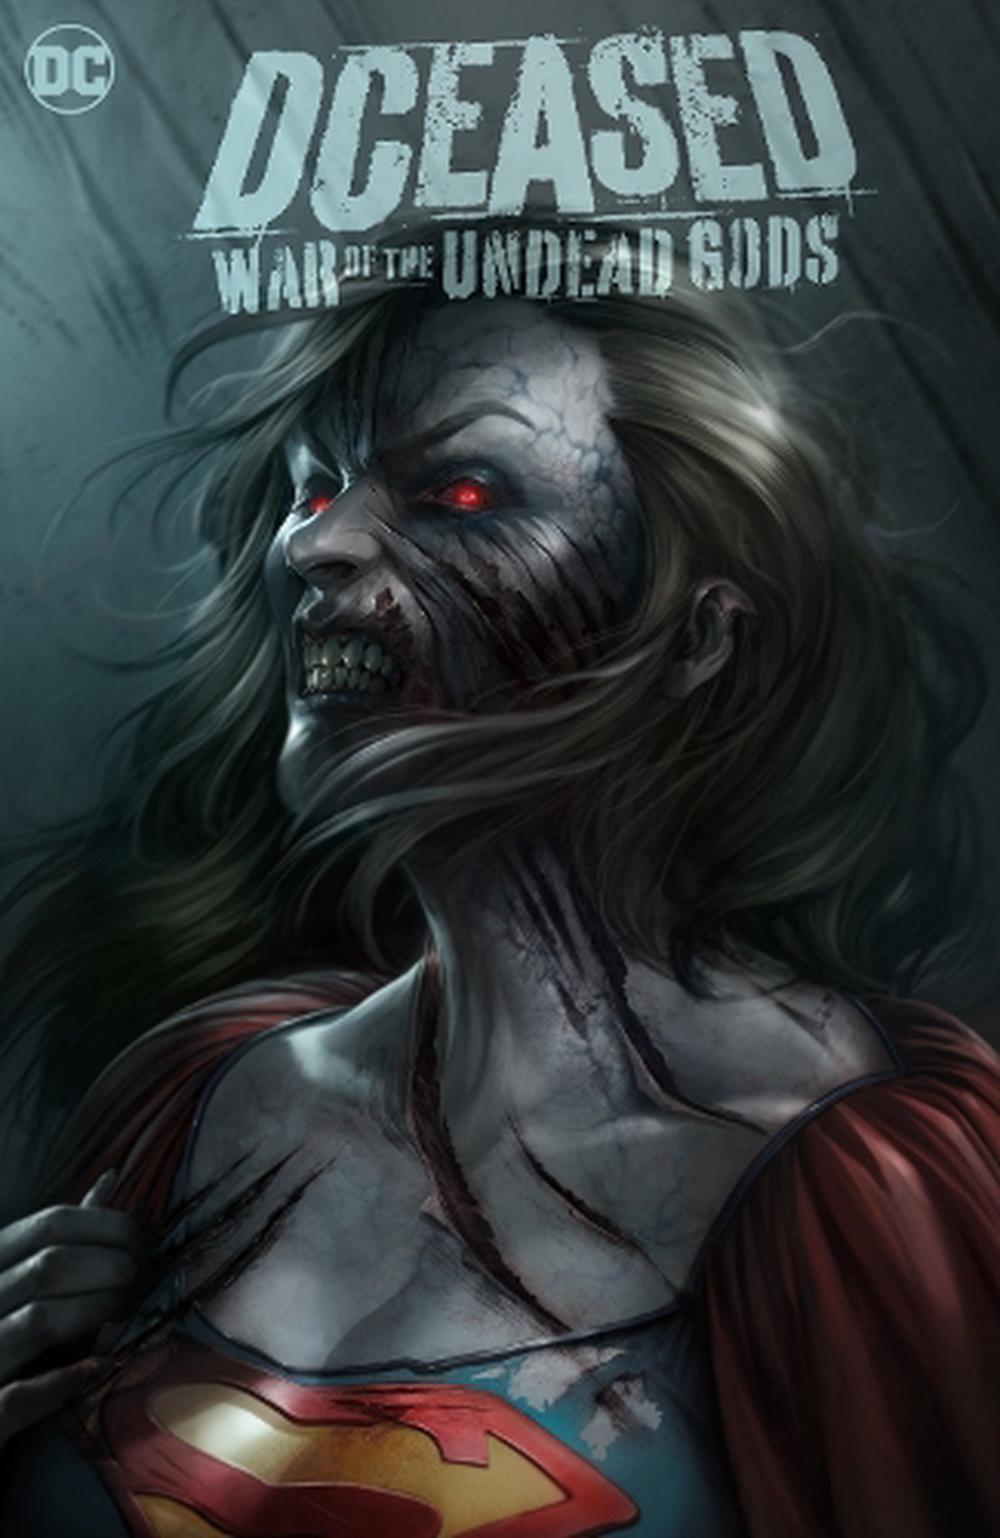 DCeased: War of the Undead Gods by Tom Taylor Hardcover Book